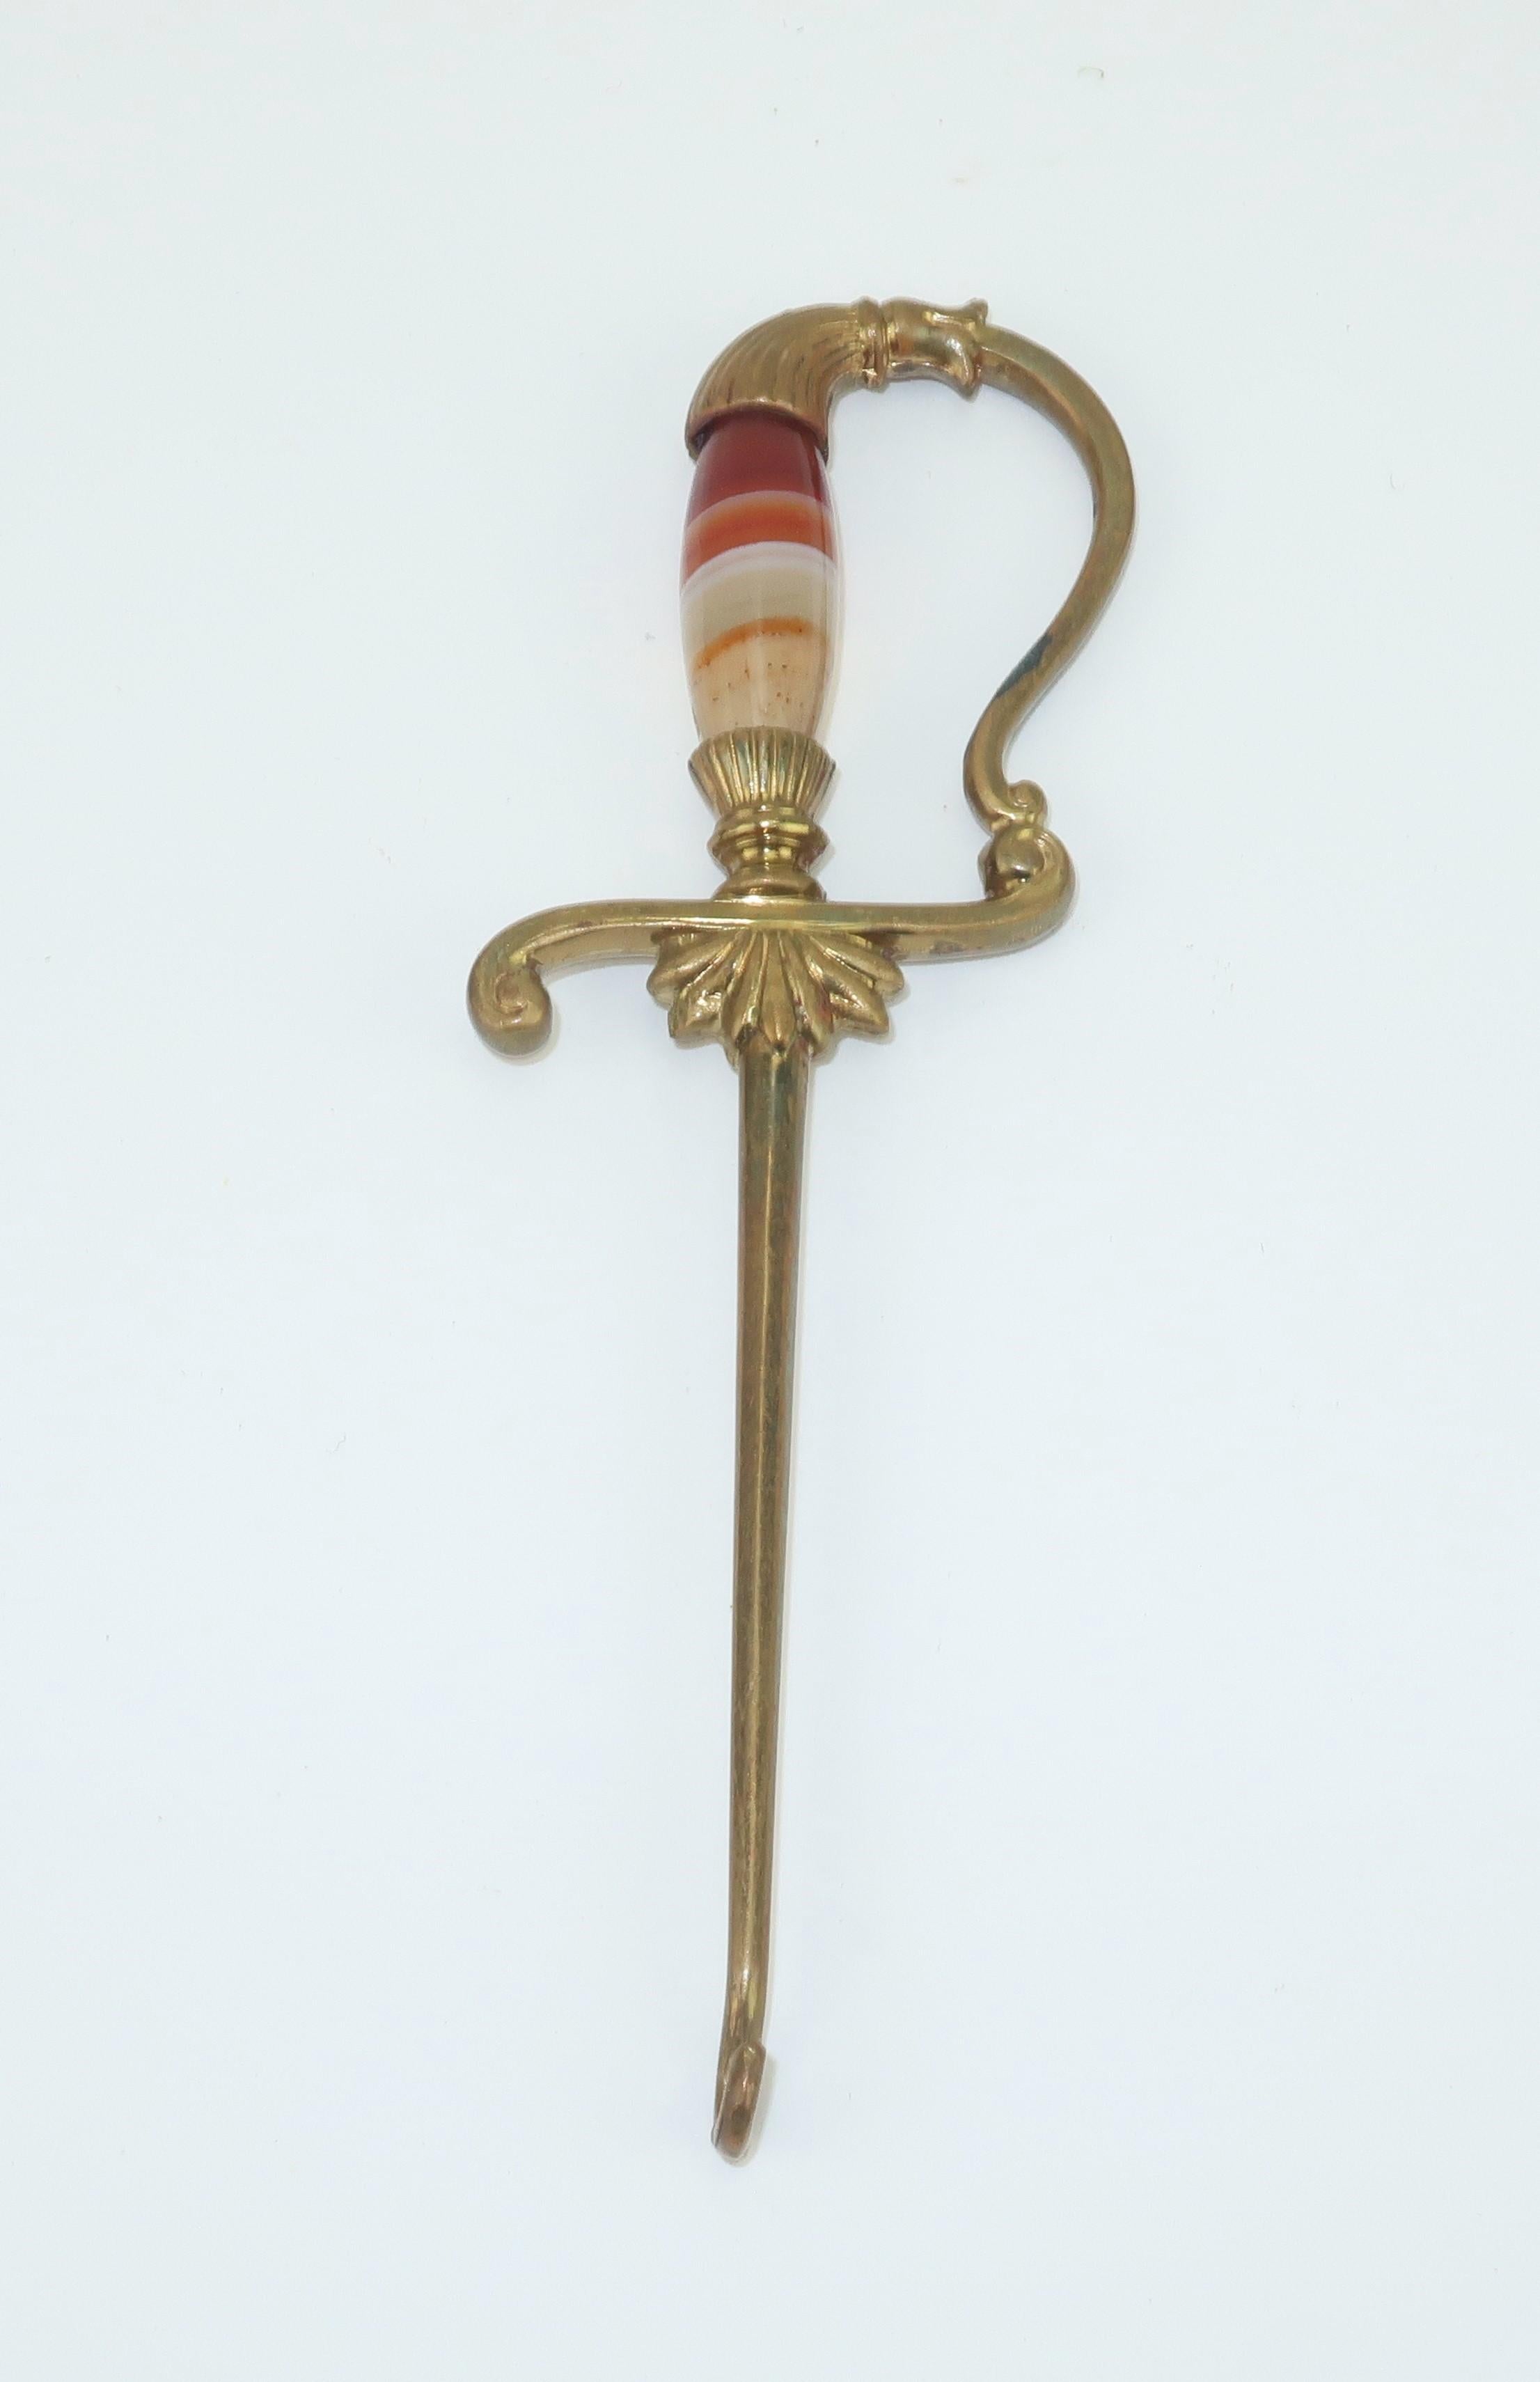 Victorian era brass button hook in the form of an ornate sword with a polished agate handle.  Perfect accessory for your favorite swashbuckler!  No maker's mark though well made with quality details.
CONDITION
Good condition though there is a spot